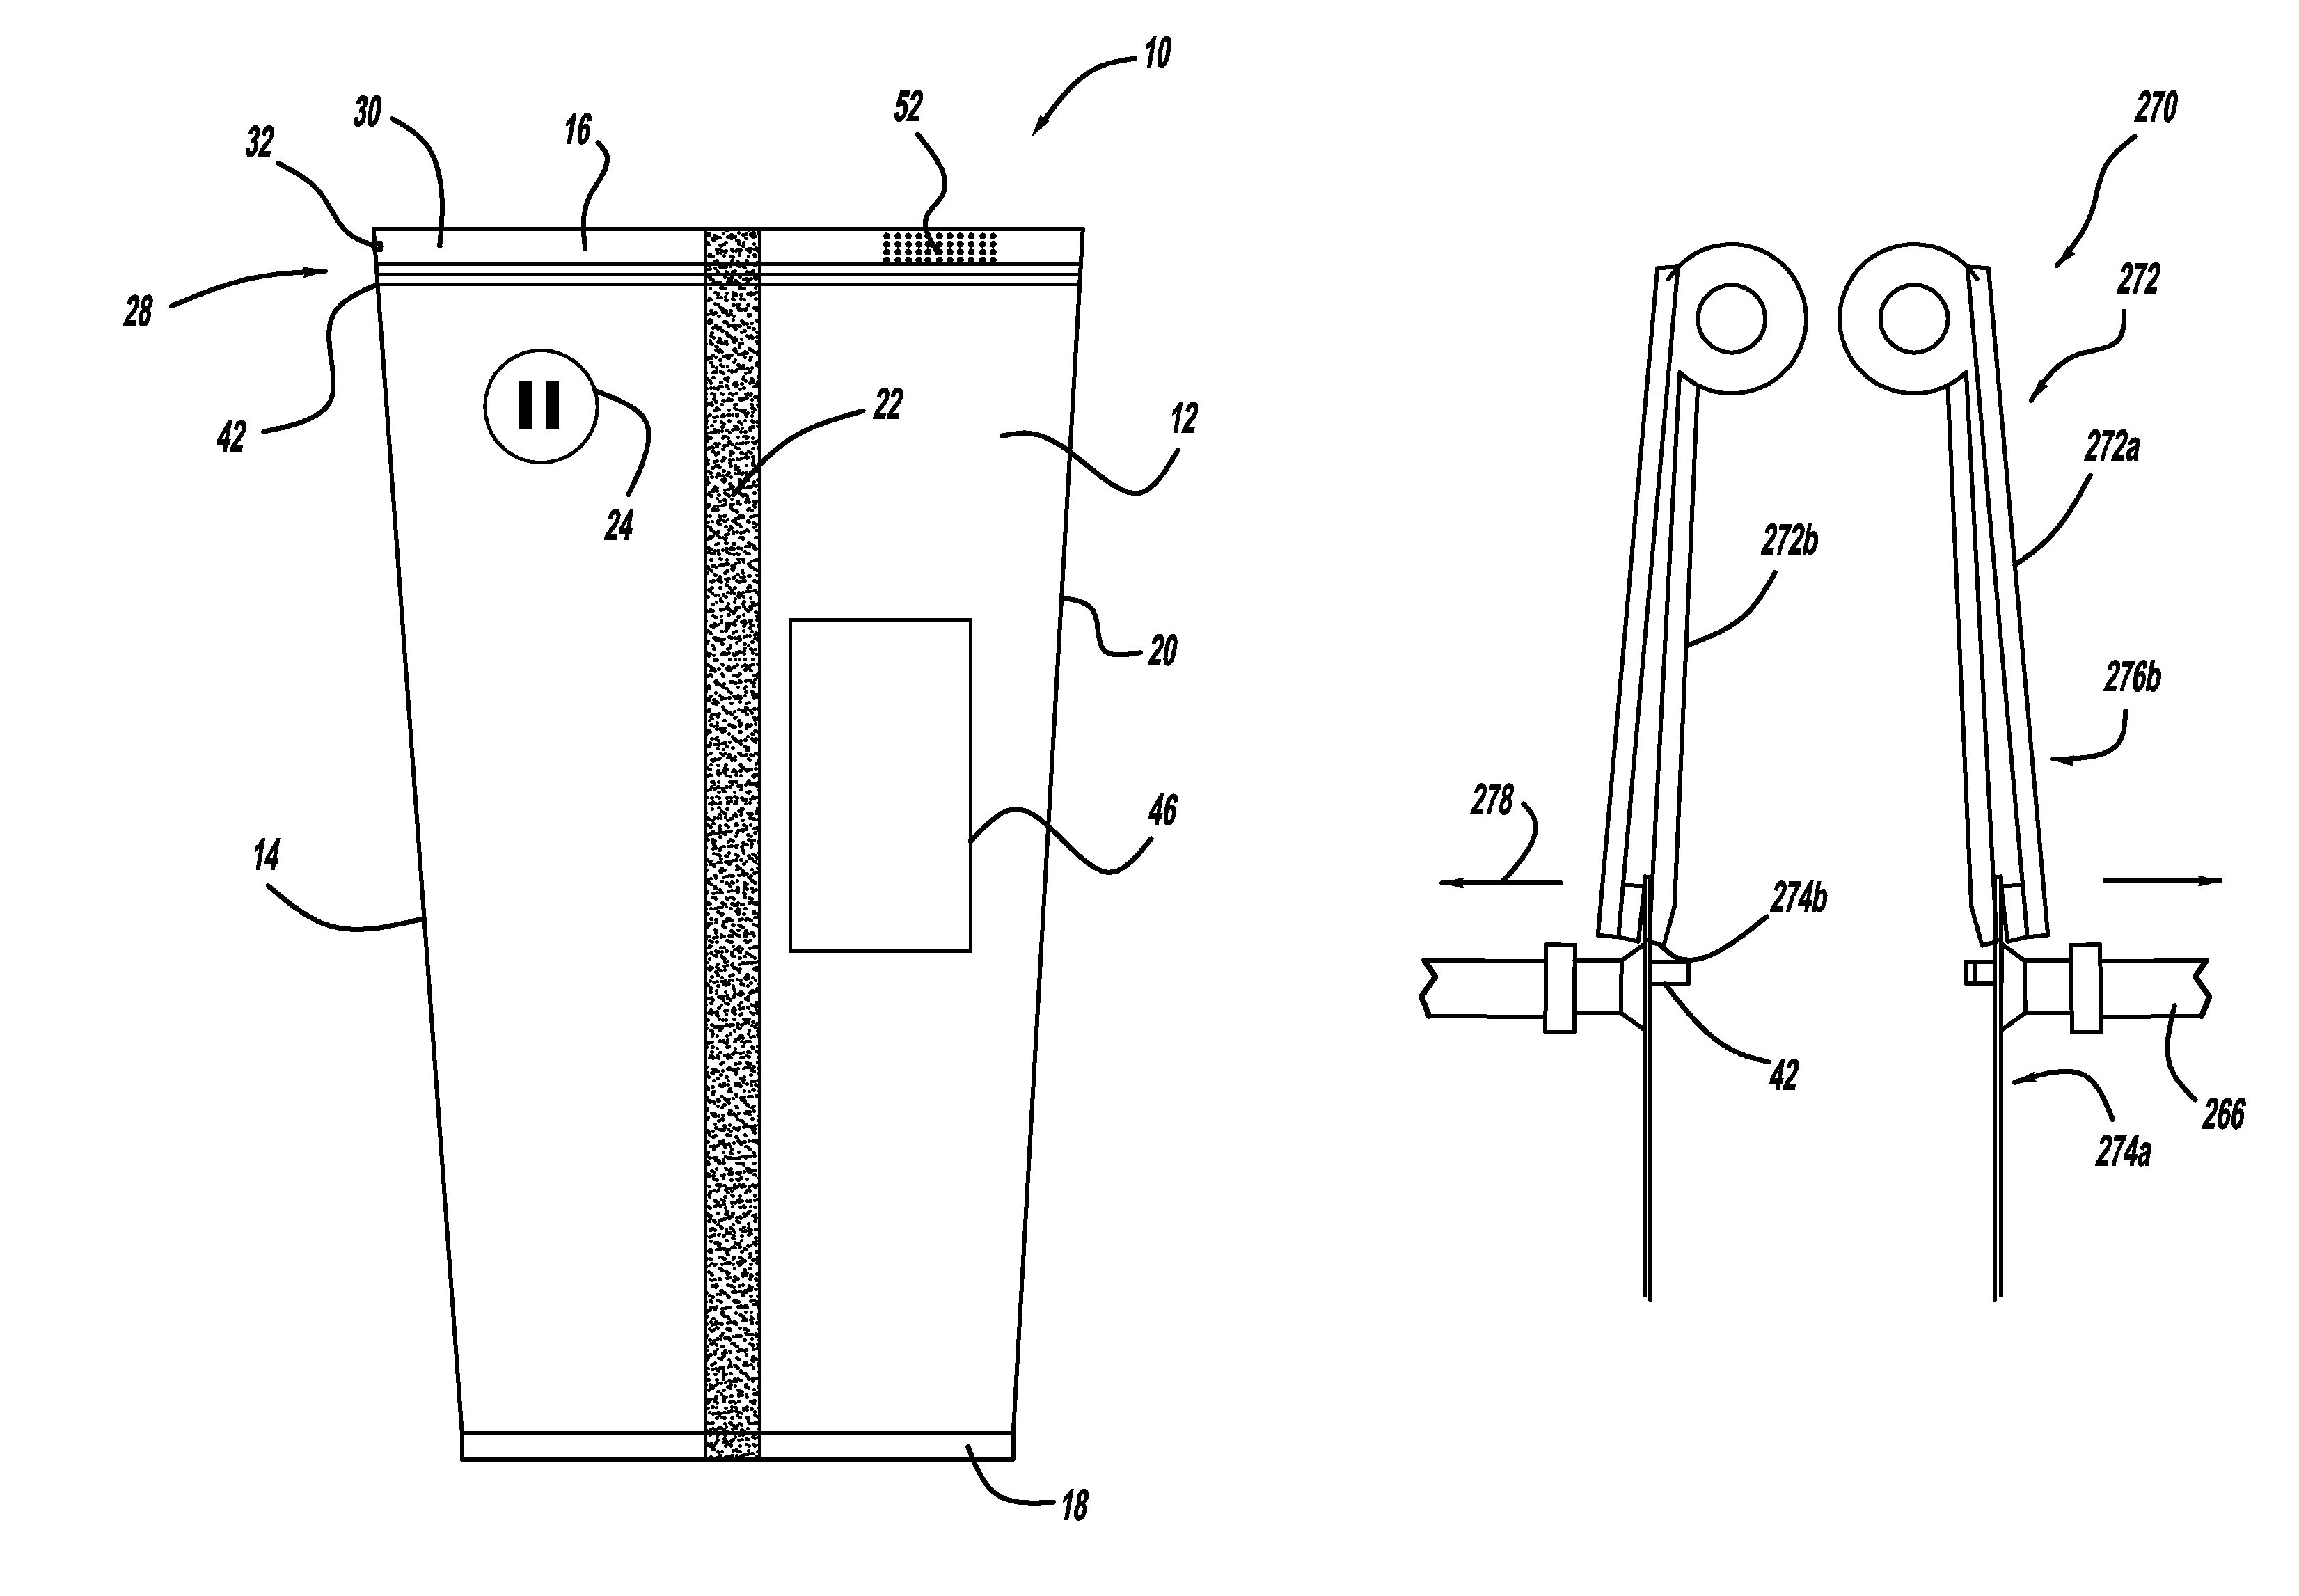 Method and apparatus for opening a flexible pouch using opening fingers